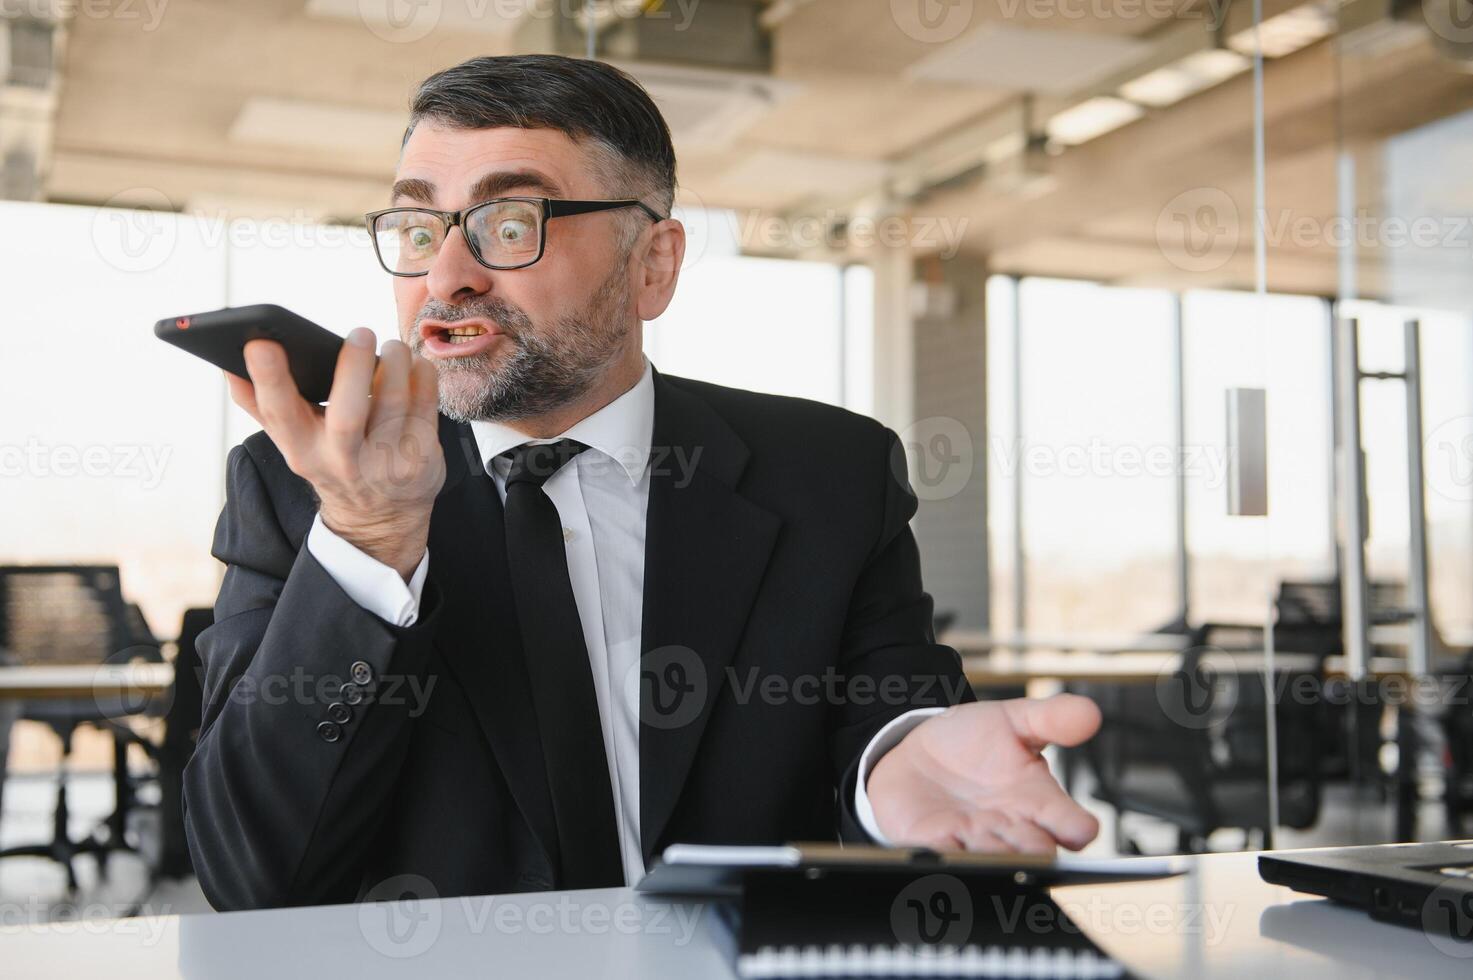 Corporate mad people yell authority tell speak with staff people person concept. Side profile view portrait of disappointed tired busy sad upset agent financier shouting on receiver in his hand photo